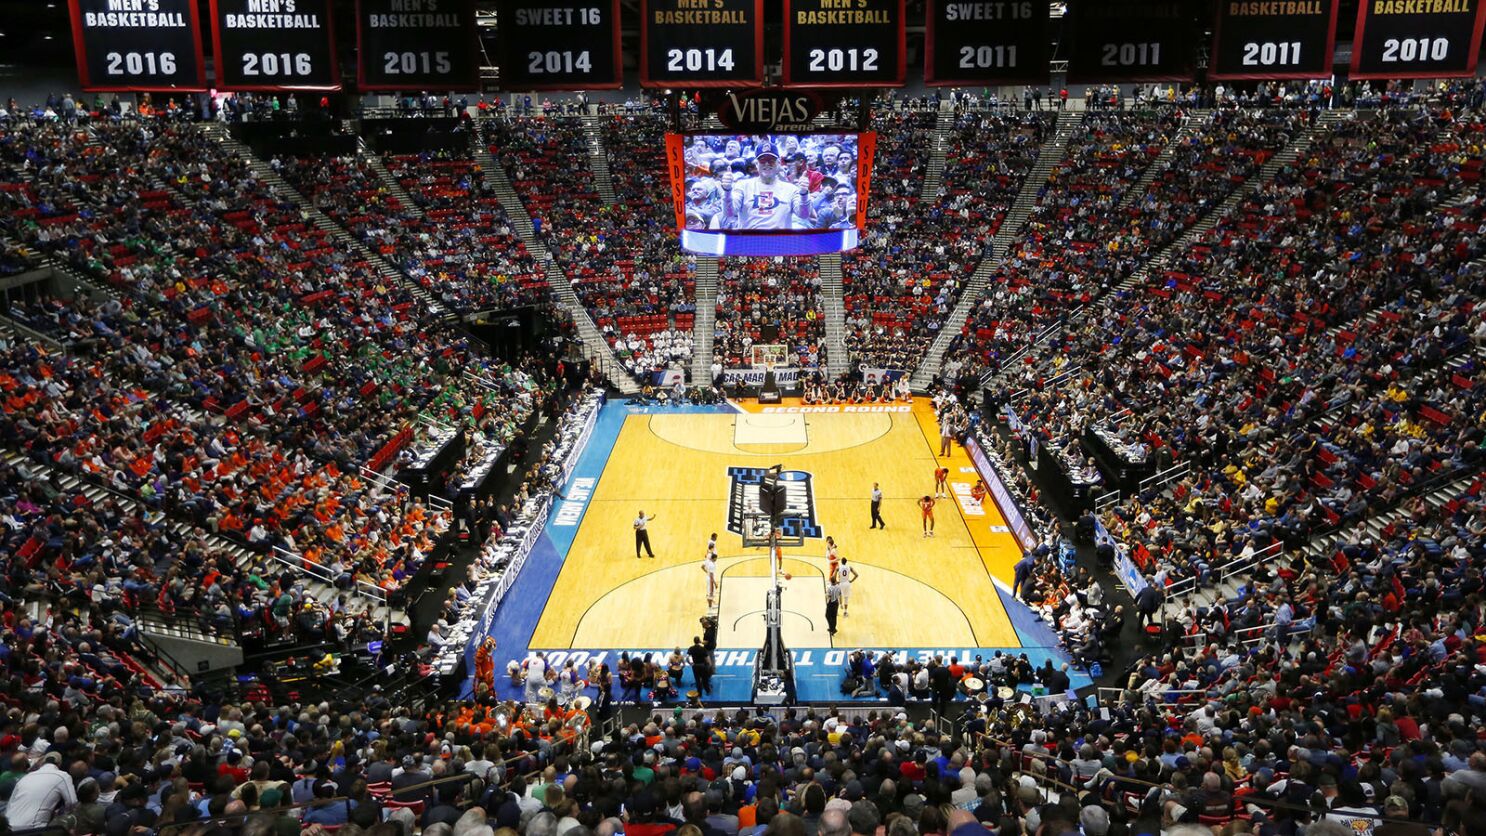 NCAA selects Viejas Arena as 2026 basketball tournament site; USD, UCSD to  host other sports - The San Diego Union-Tribune